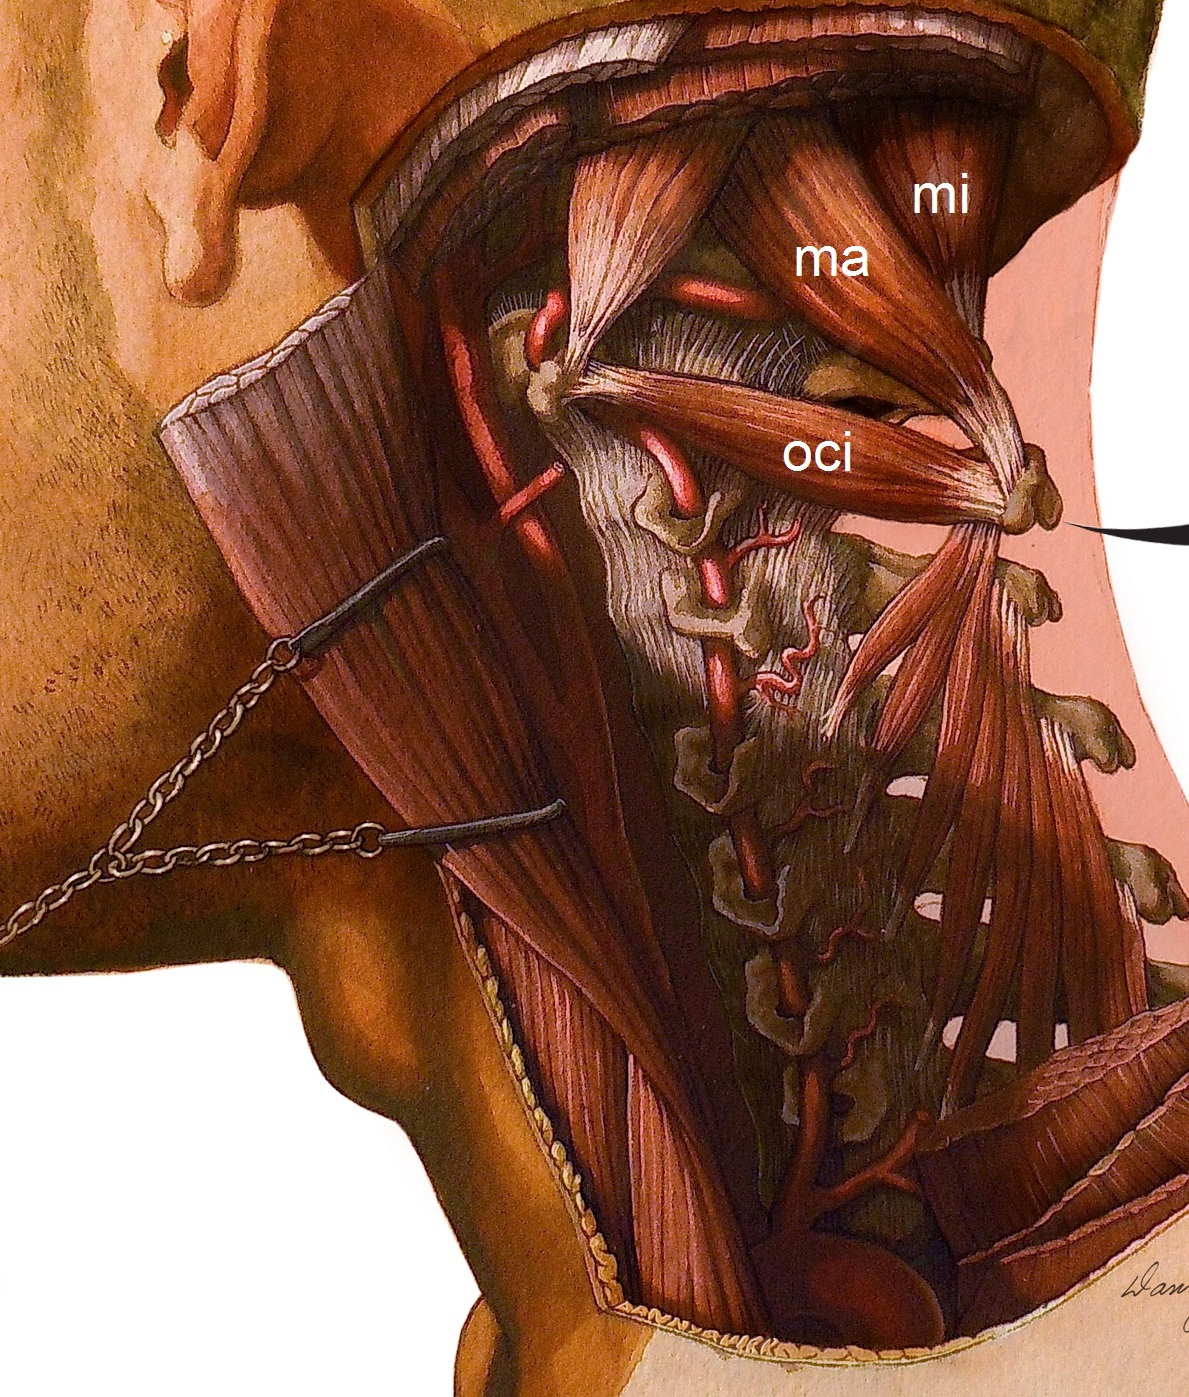 anatomy  Myodural Bridge Dr. Frank Scali suboccipital triangle clinical anatomy  medical illustration Danny Quirk human anatomy dissections origins/insertions watercolors  Scientific Illustration